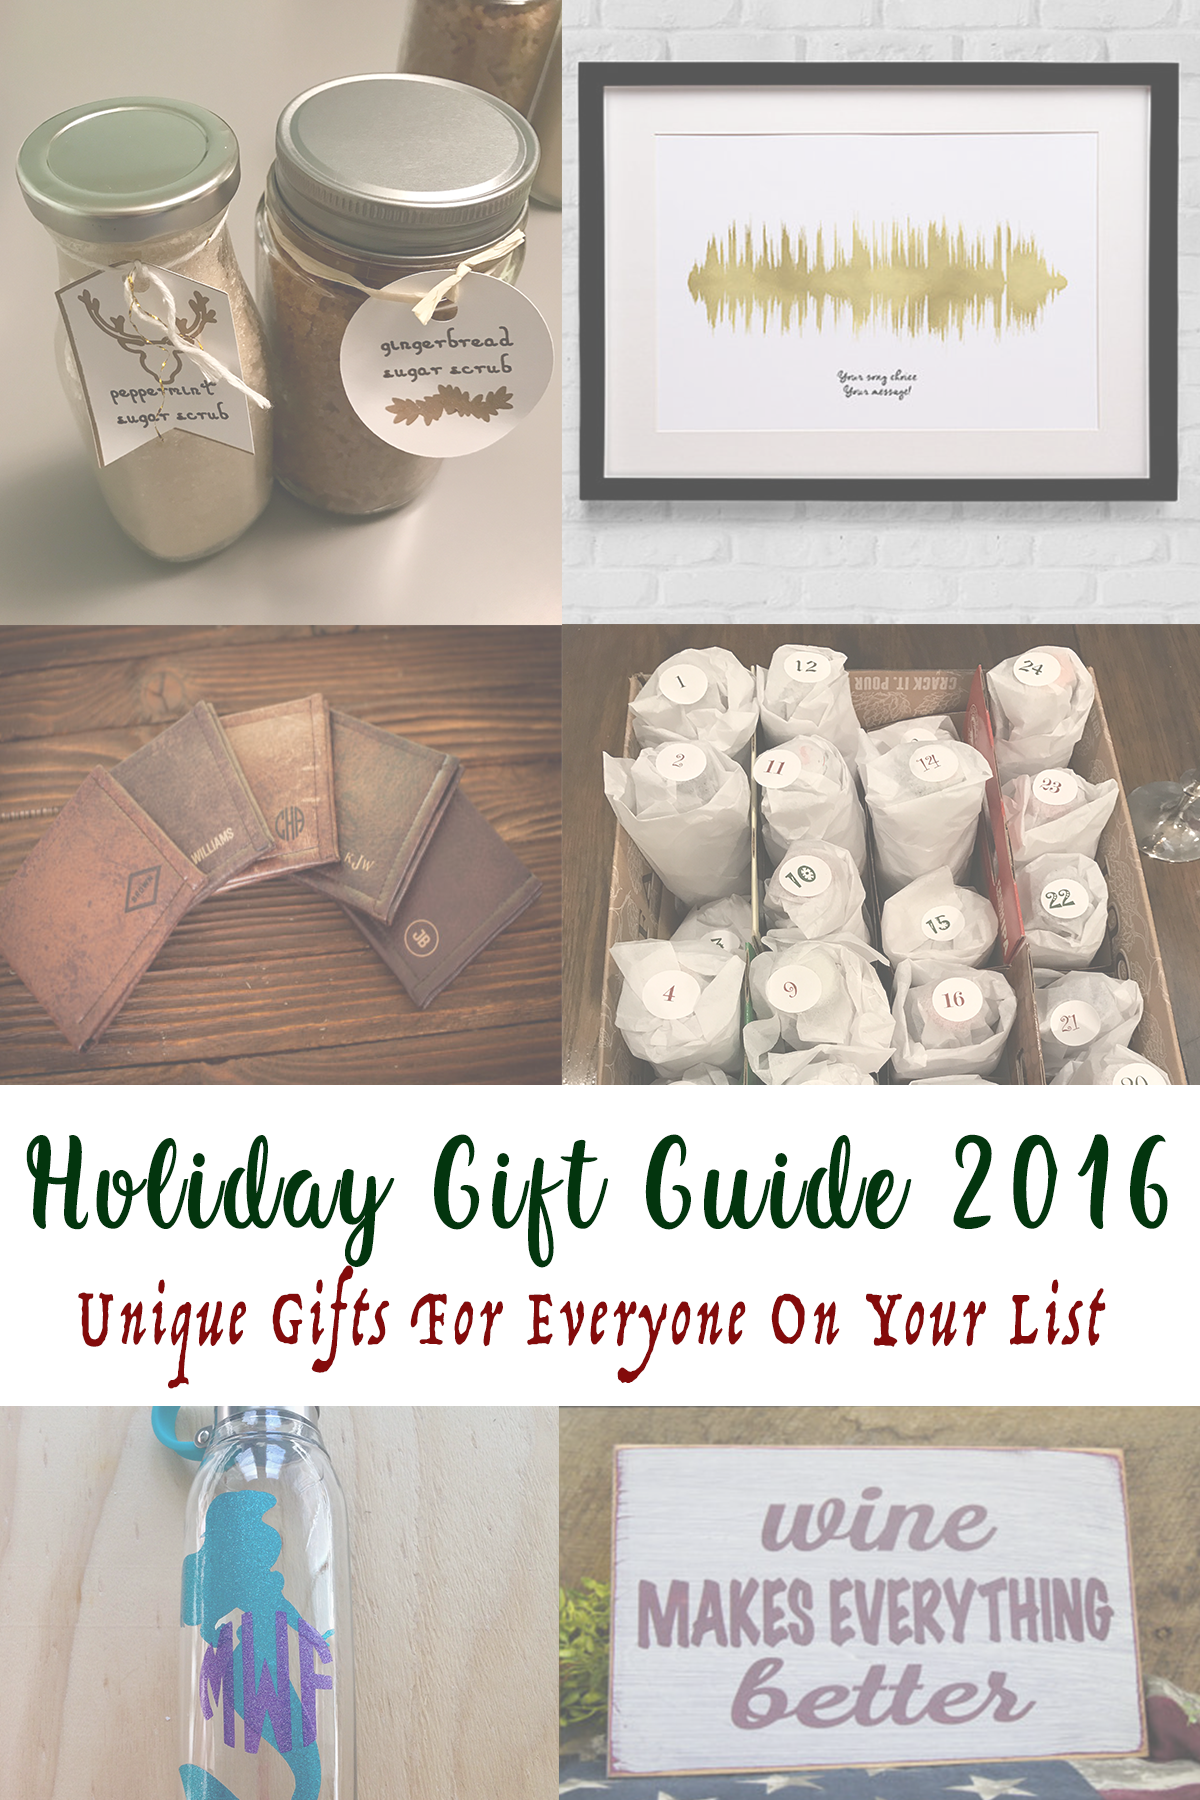 Great gift ideas to please everyone on your list